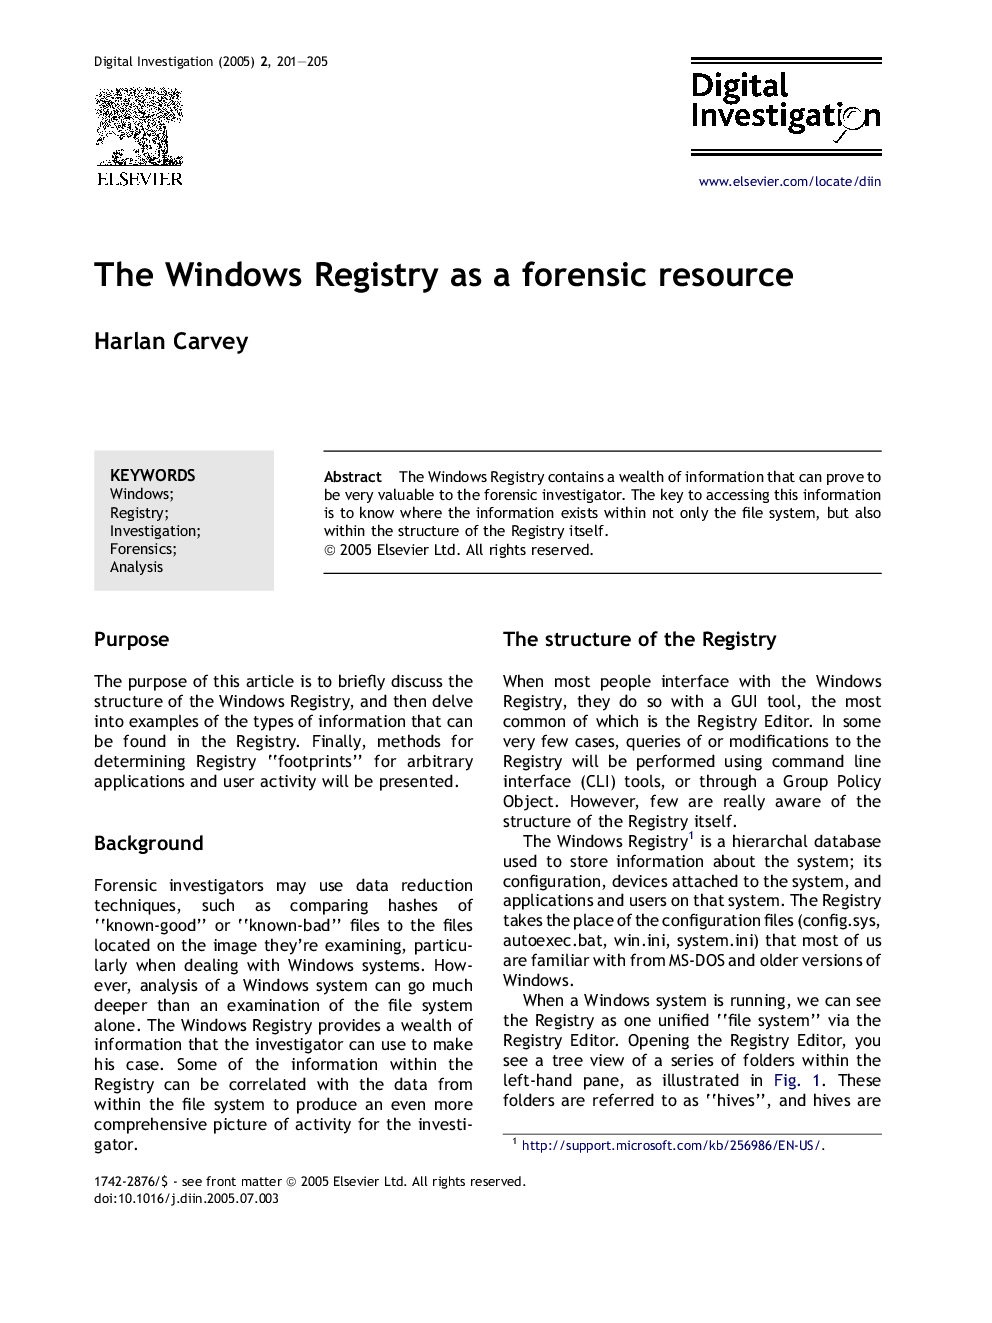 The Windows Registry as a forensic resource